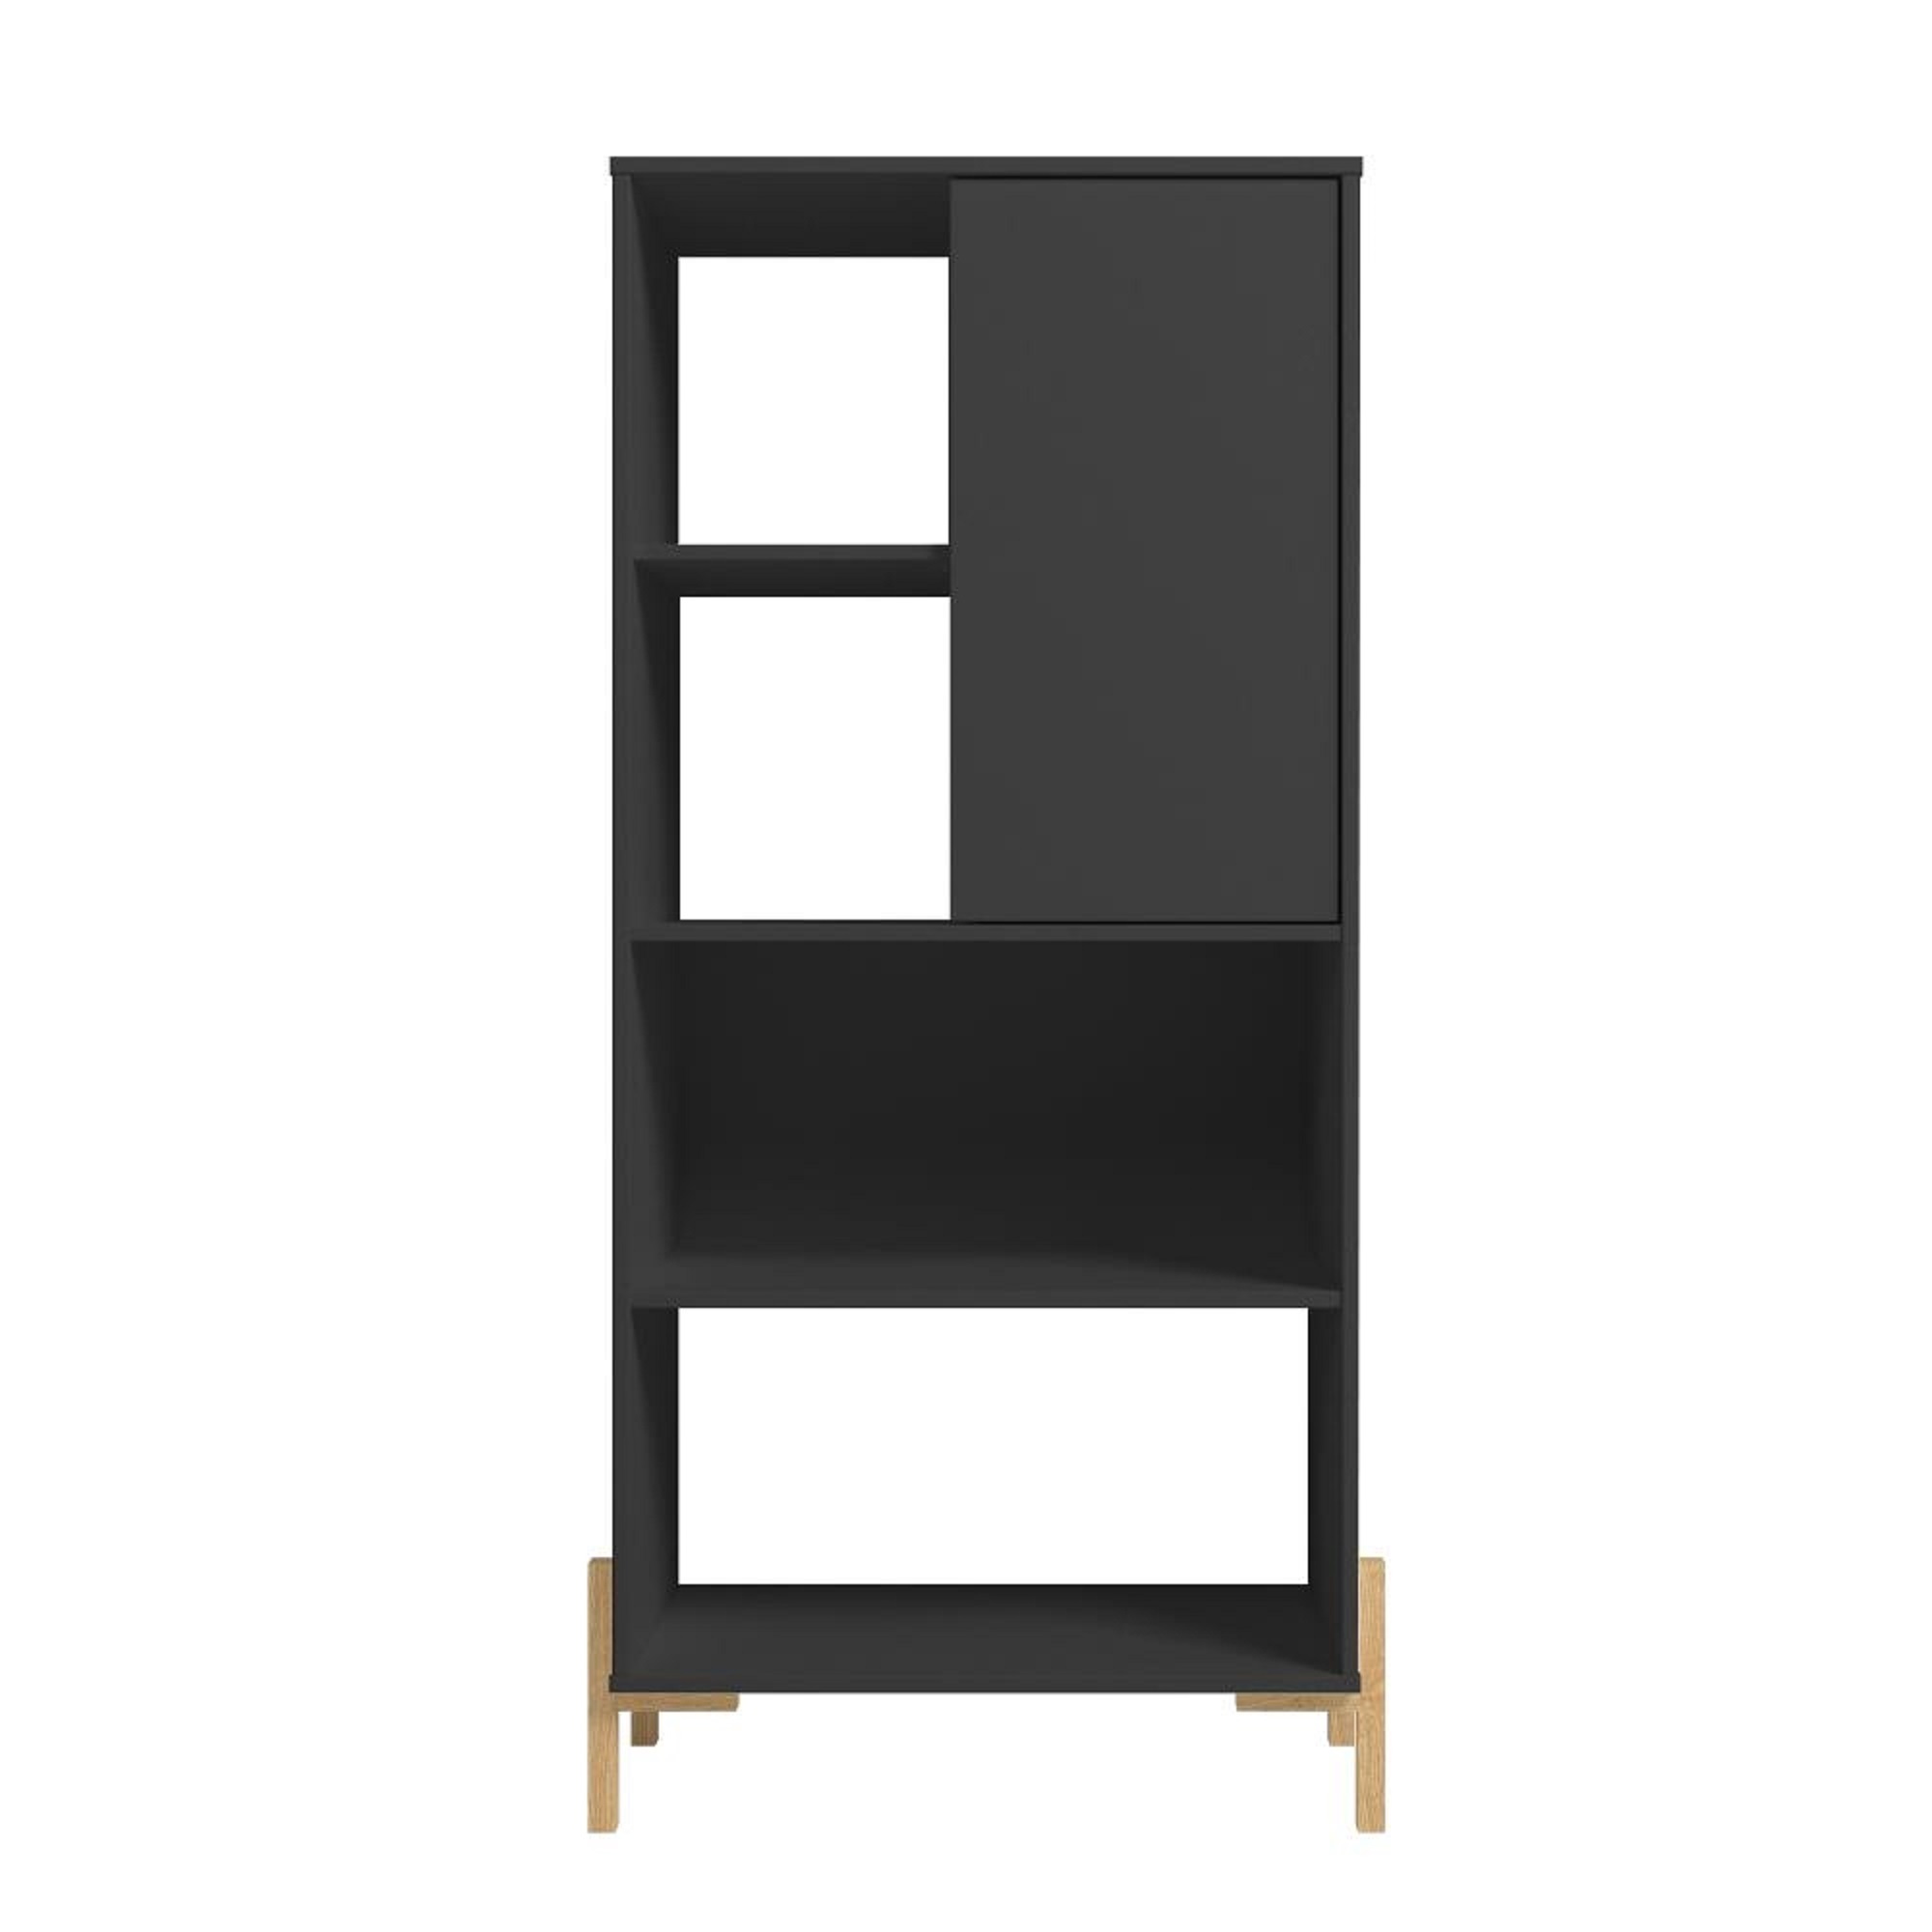 Manhattan Comfort, Bowery Bookcase with 5 Shelves in Black and Oak, Height 60.43 in, Shelves (qty.) 5 Material MDPE, Model 308AMC